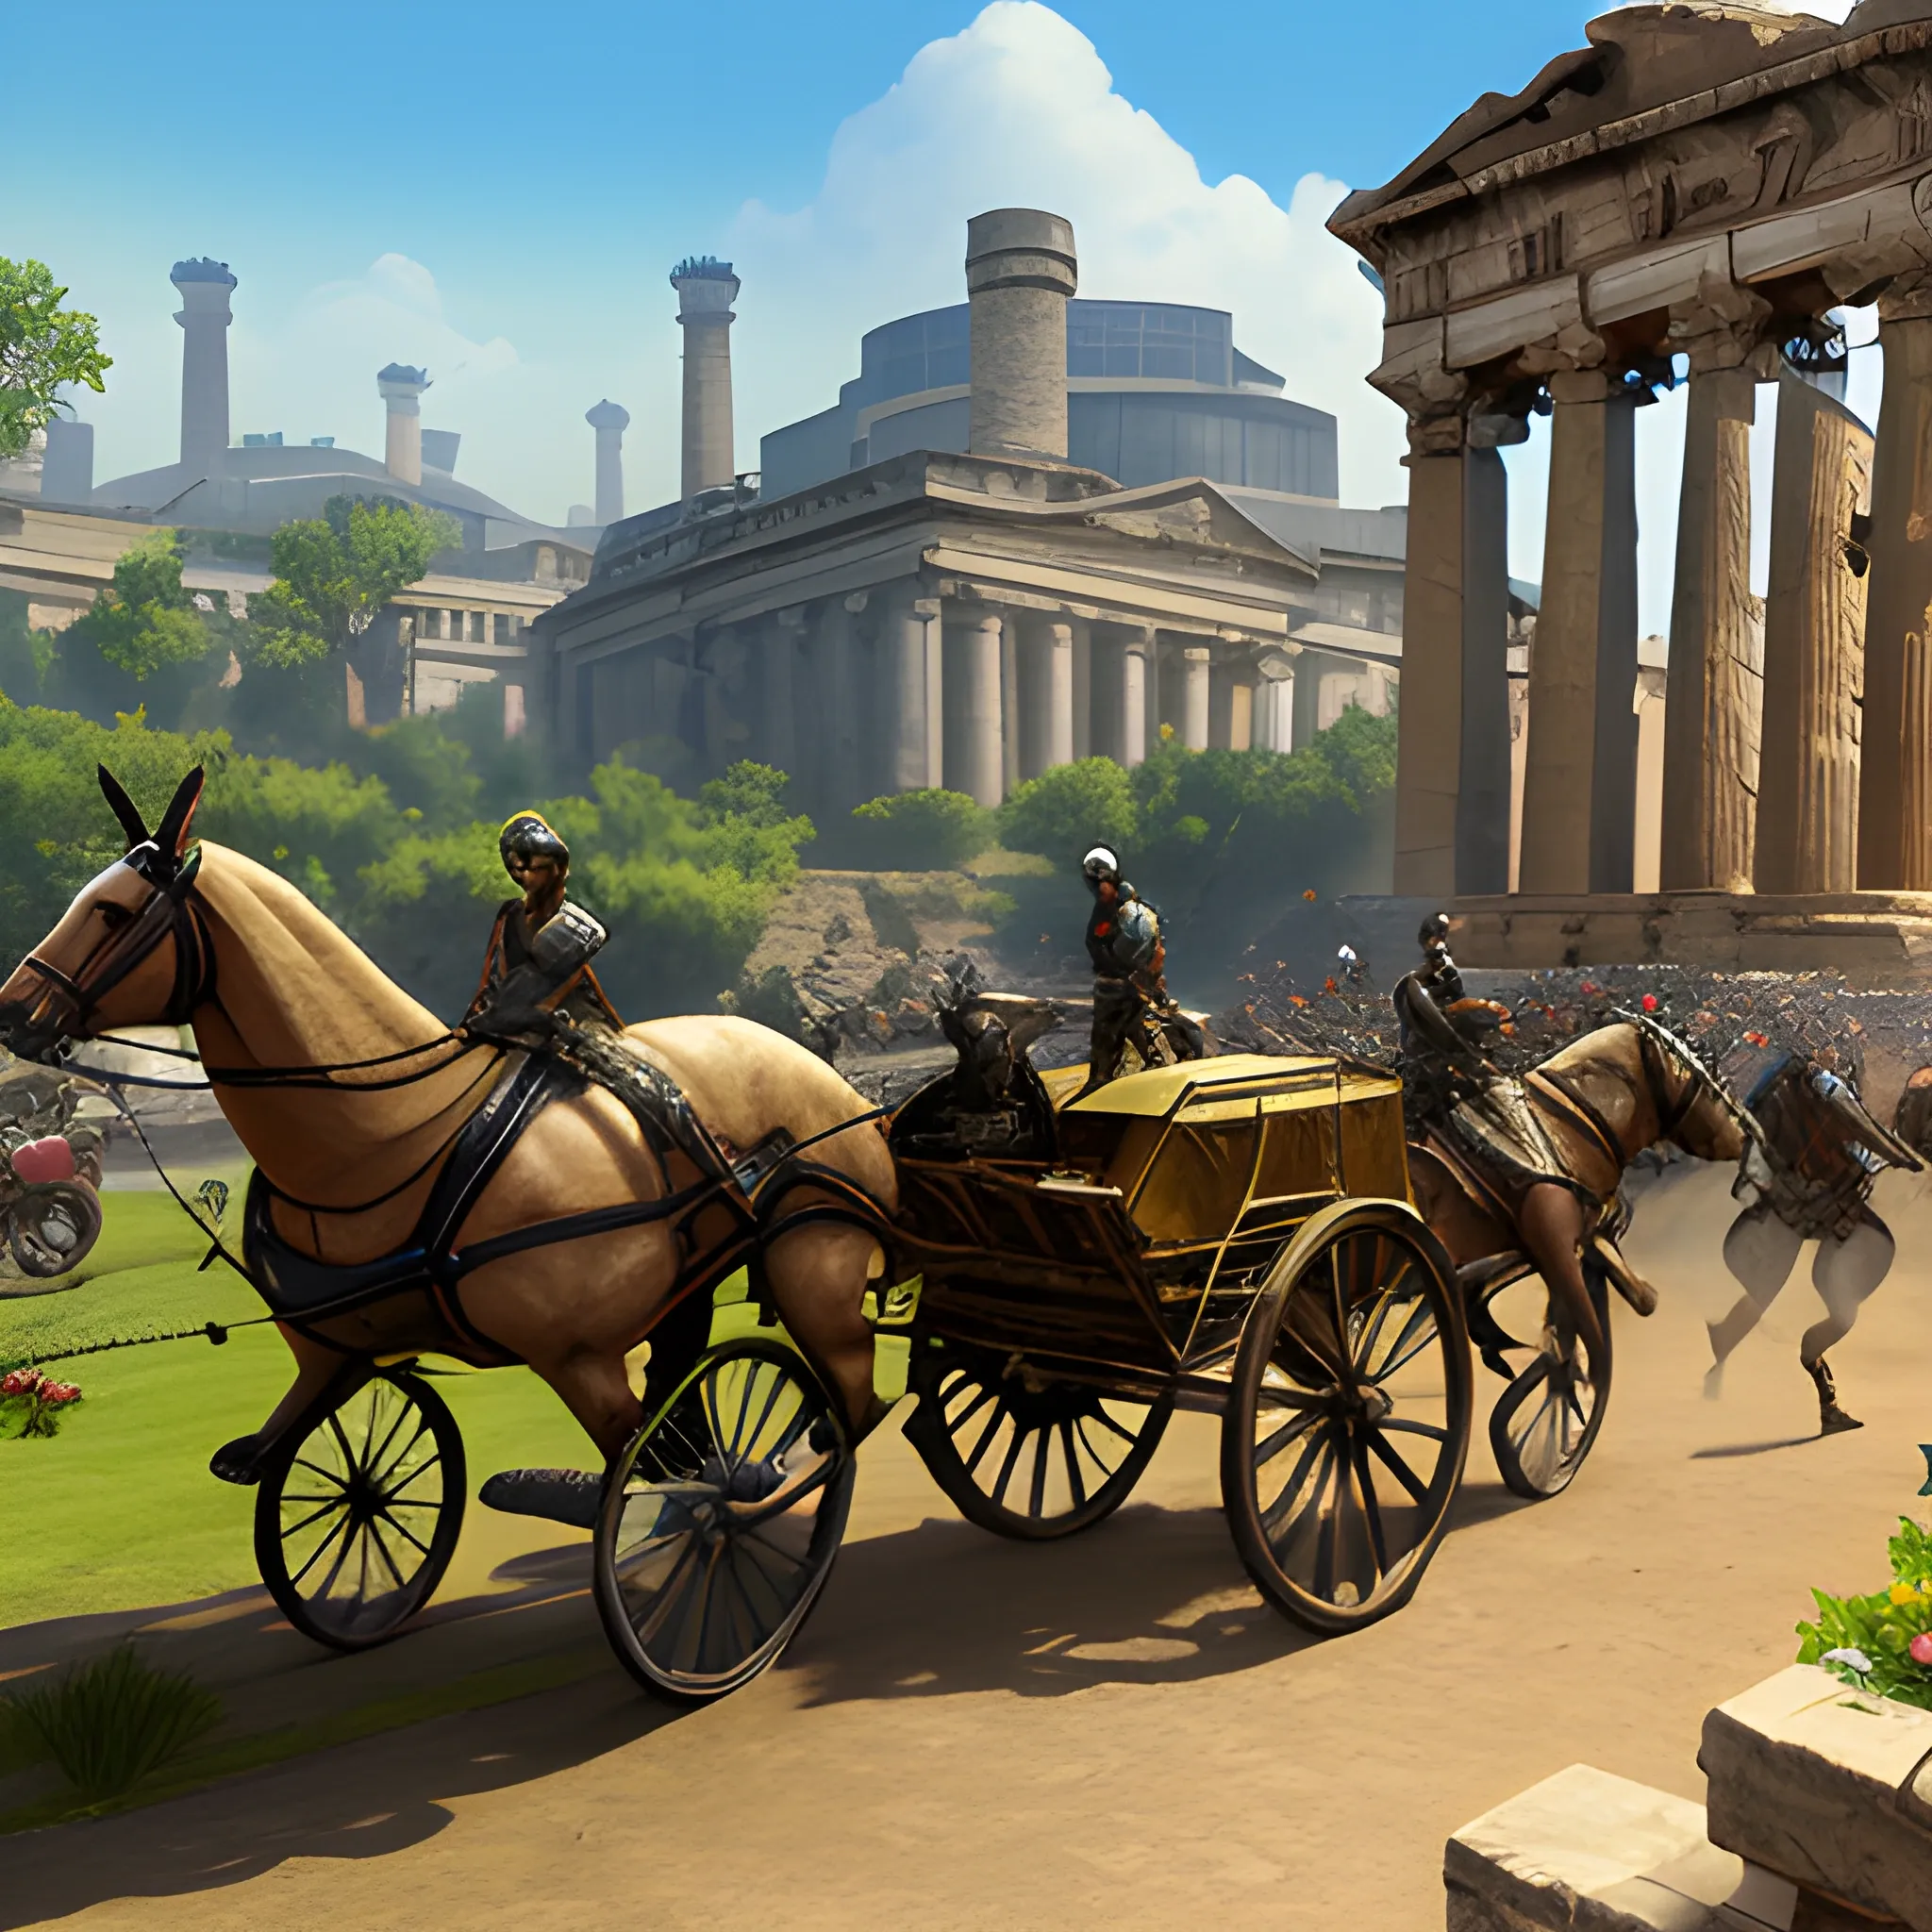 videogame screenshot with huge spangly sparkly triple-barrelled assault rifle with gunsight in foreground, with young mothers pushing buggies, in a municipal gardens, in the ancient world, very detailed